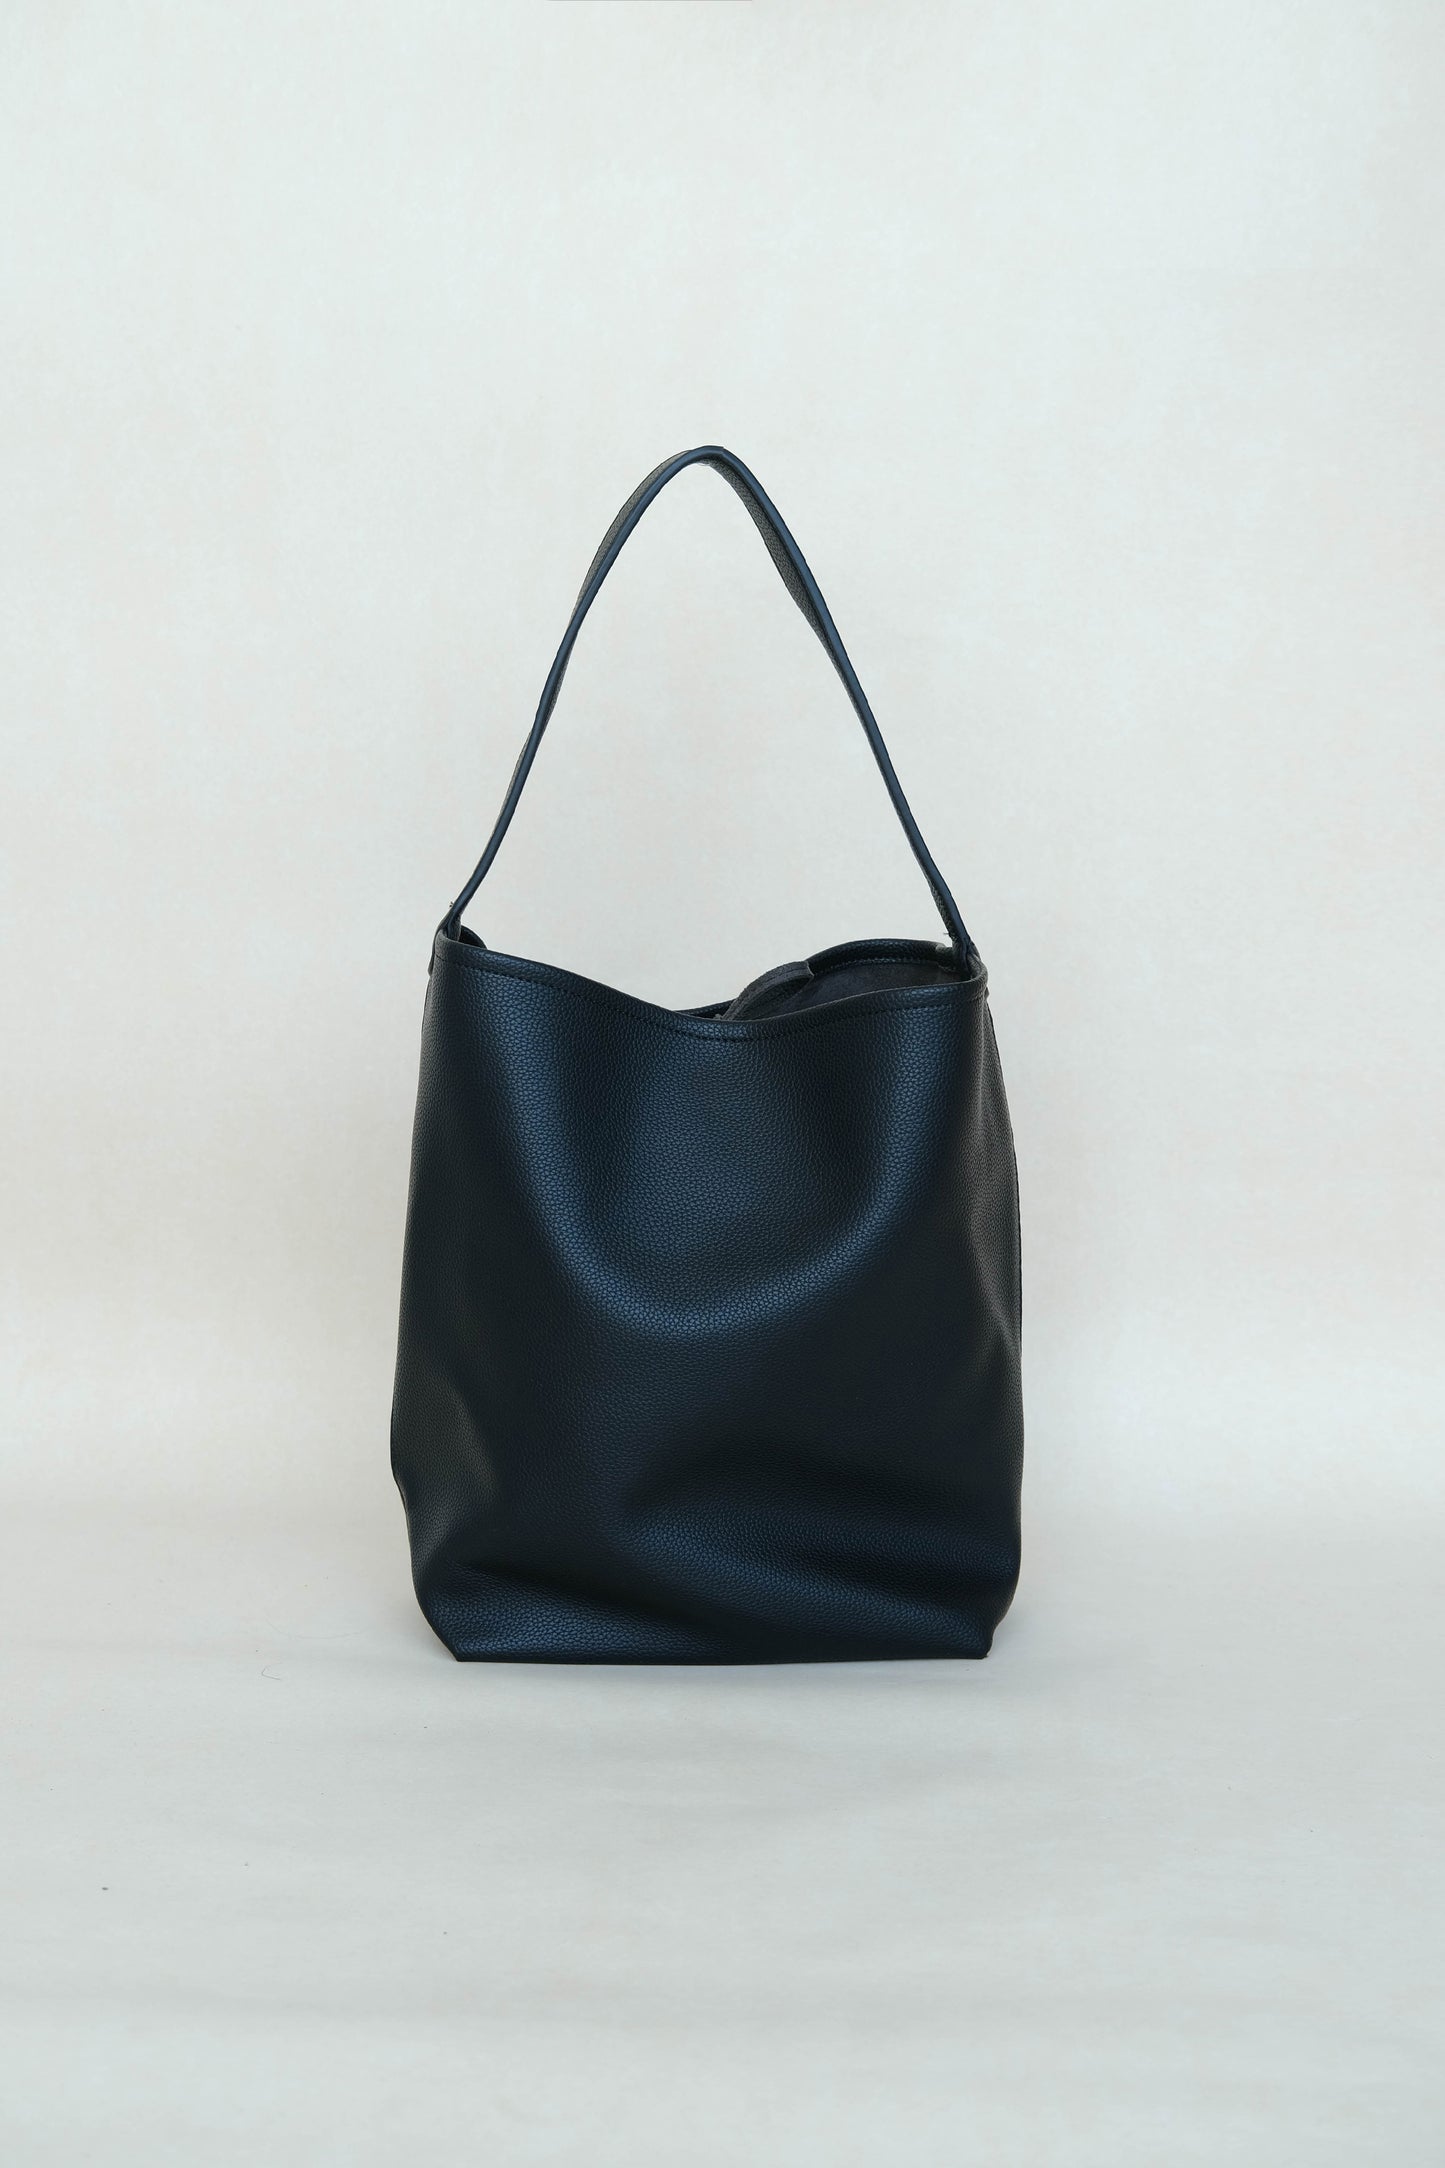 Pebbled texture soft leather simple shoulder bag in classic black